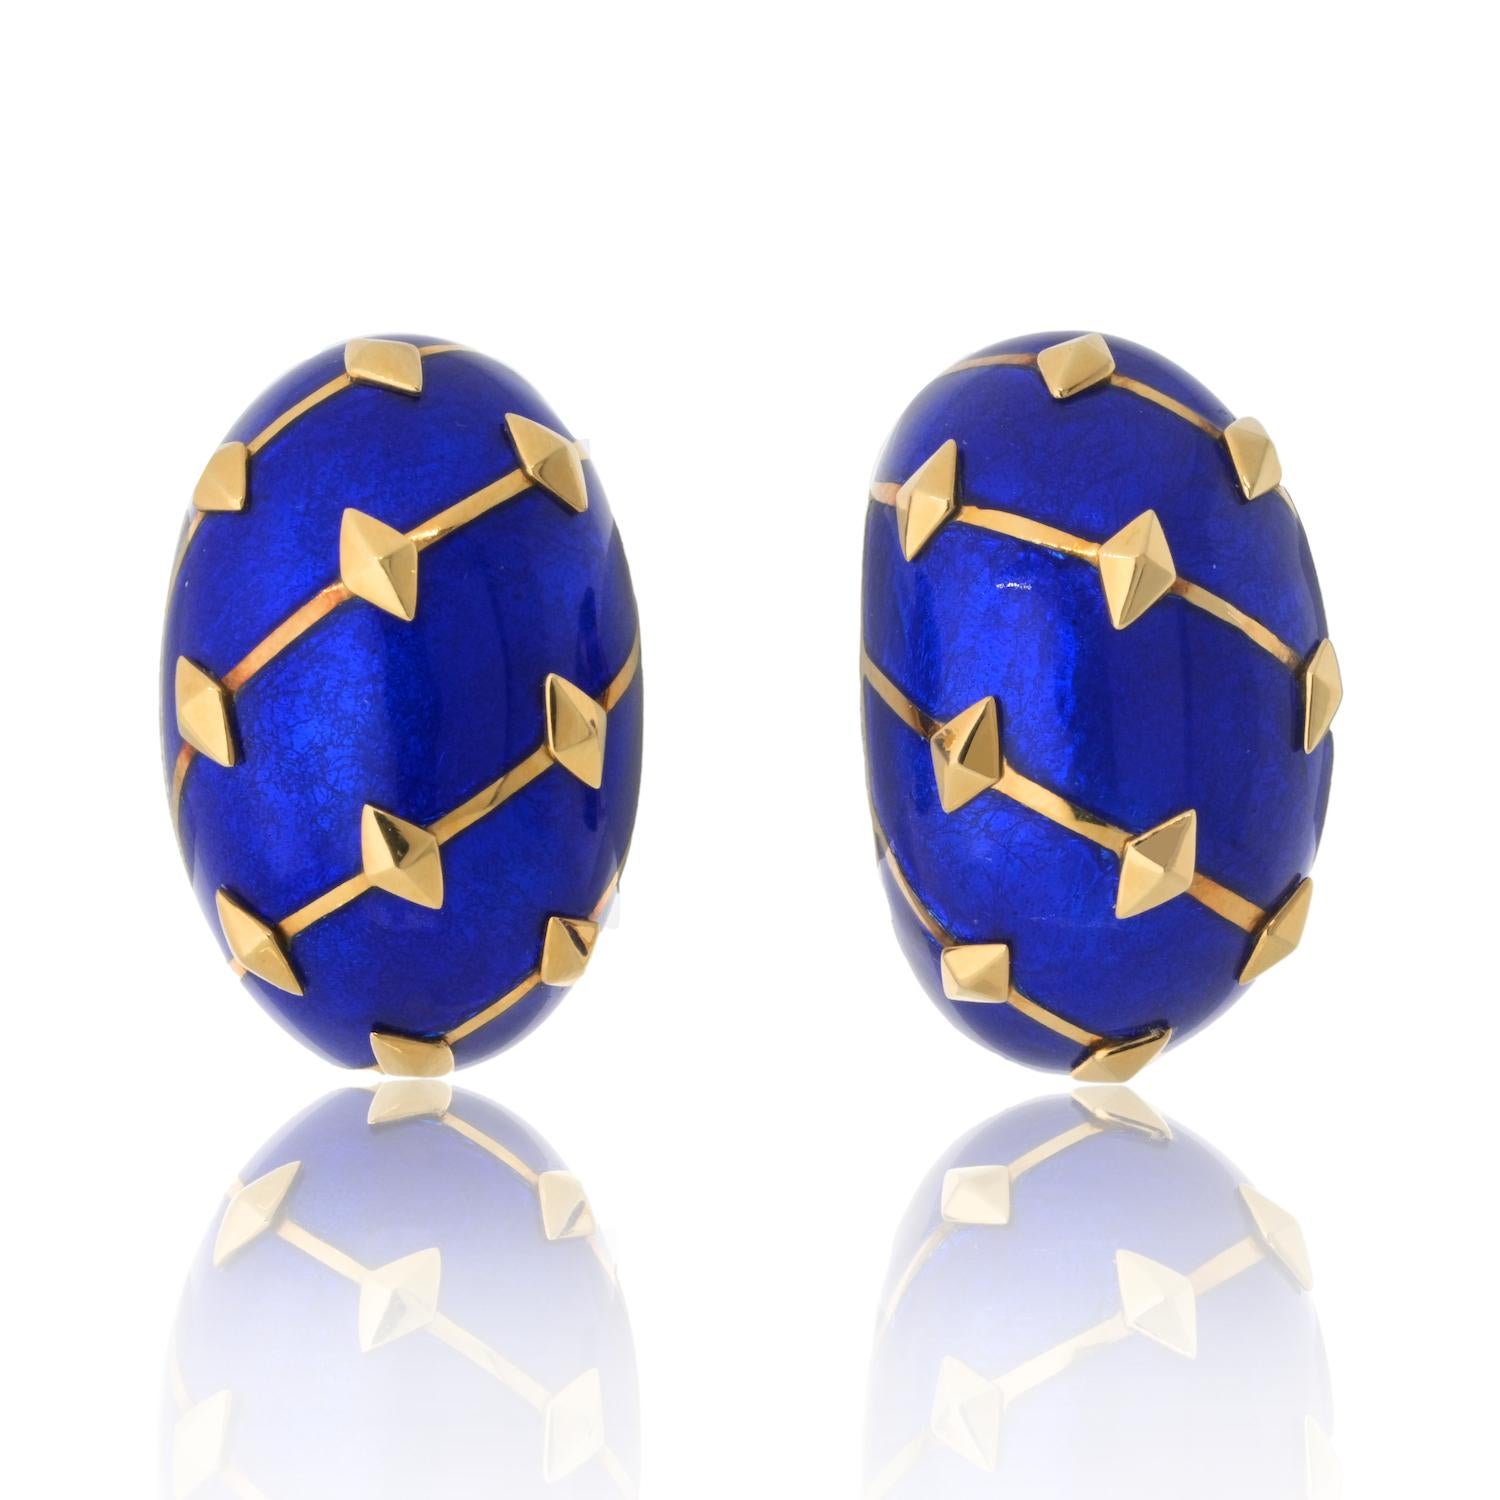 Tiffany Co France Jean Schlumberger Lozenge Earrings In 18Kt With Blue Enamel. 

Rare earrings designed by Jean Schlumberger for Tiffany & Co.
This pair has been created at the prestigious Jean Schlumberger studios in Paris, France. They are part of